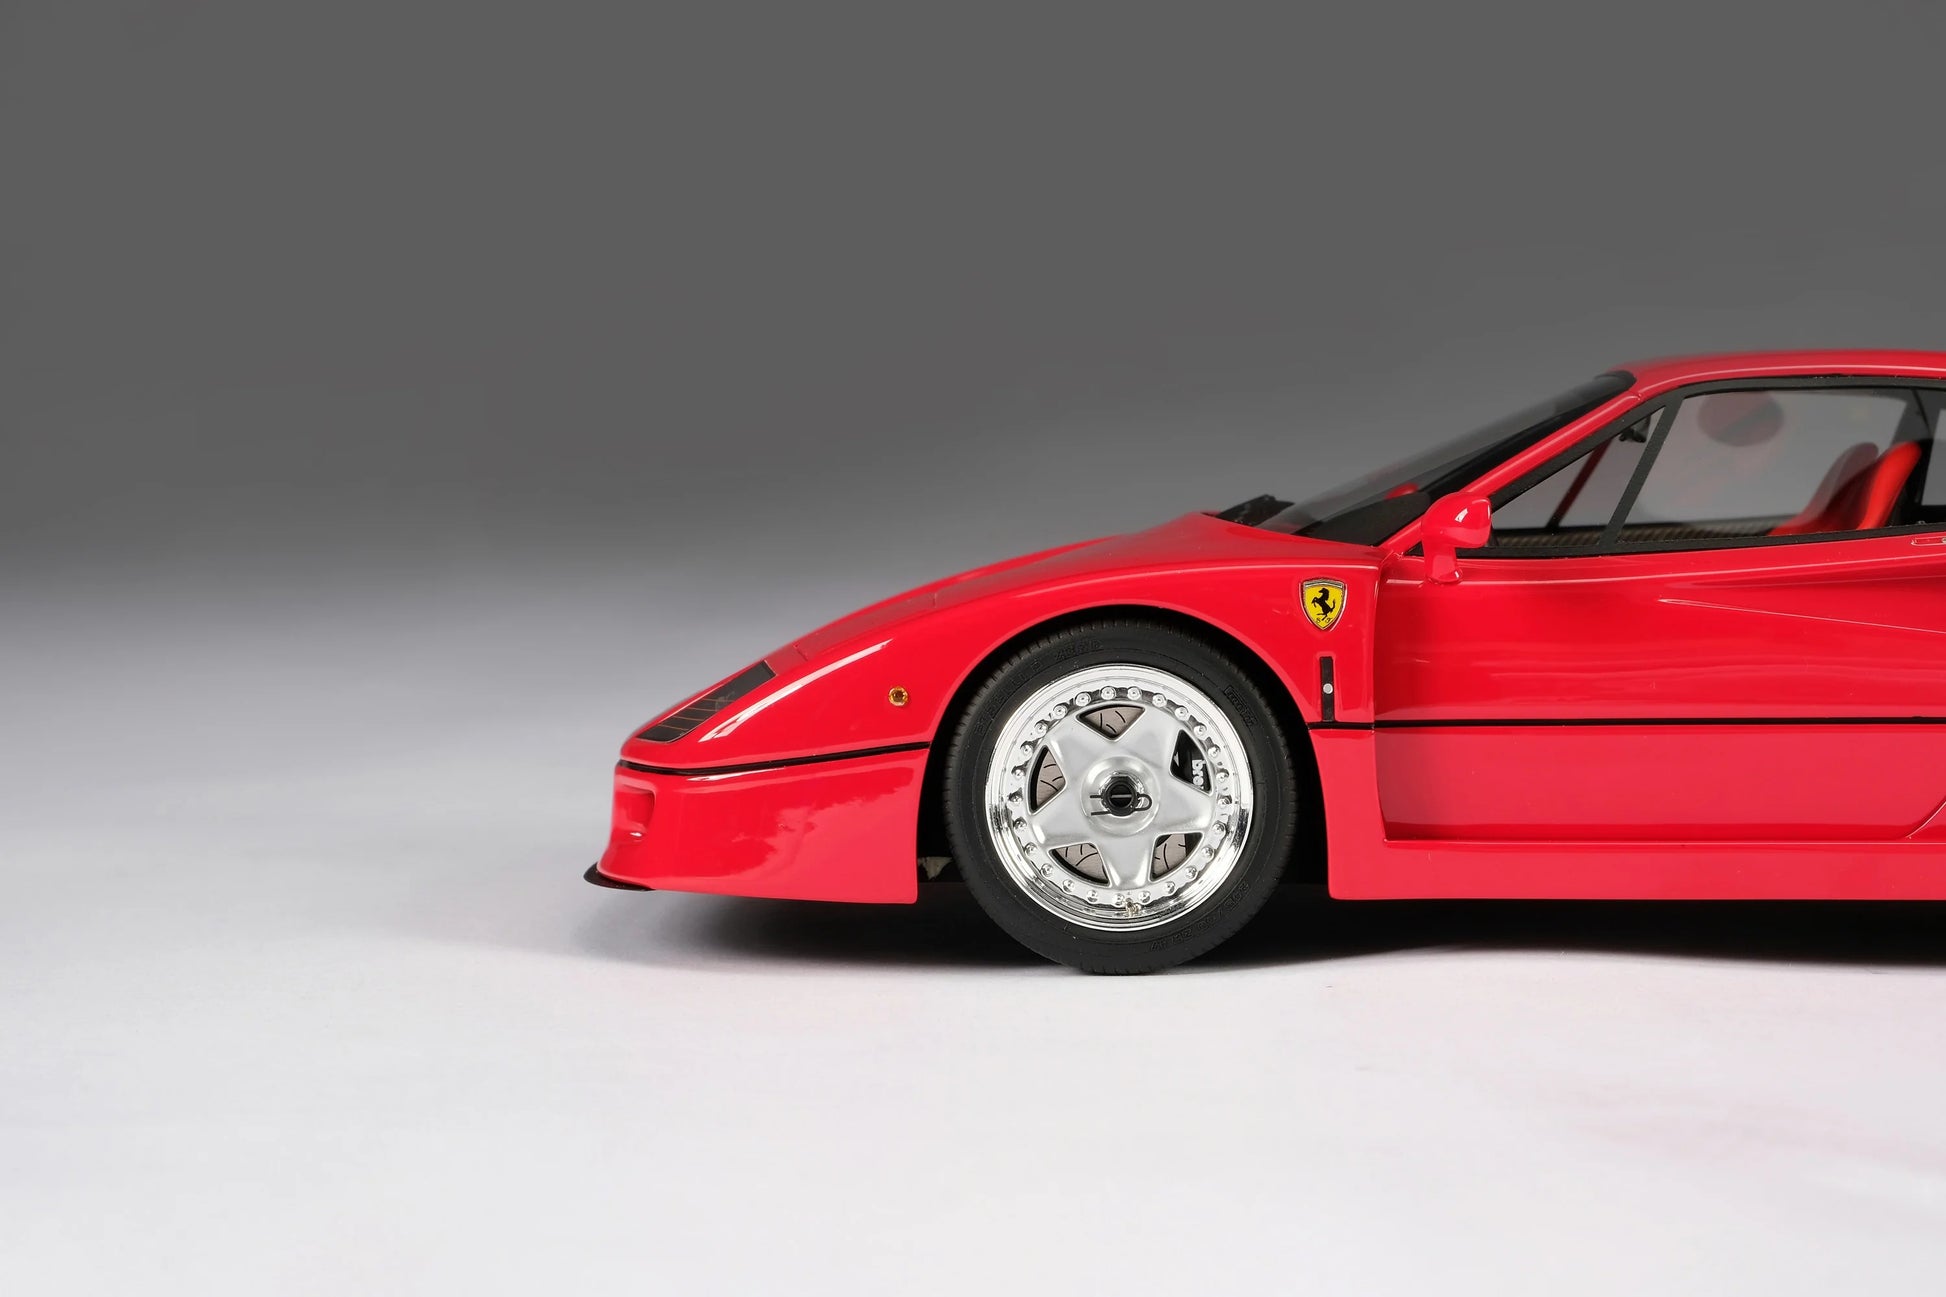 Amalgam Collection Ferrari F40 1:18 Model Car | Exquisite Replica, Highly Detailed Collector's Item | Explore a Range of Luxury Collectibles at 2Jour Concierge, #1 luxury high-end gift & lifestyle shop